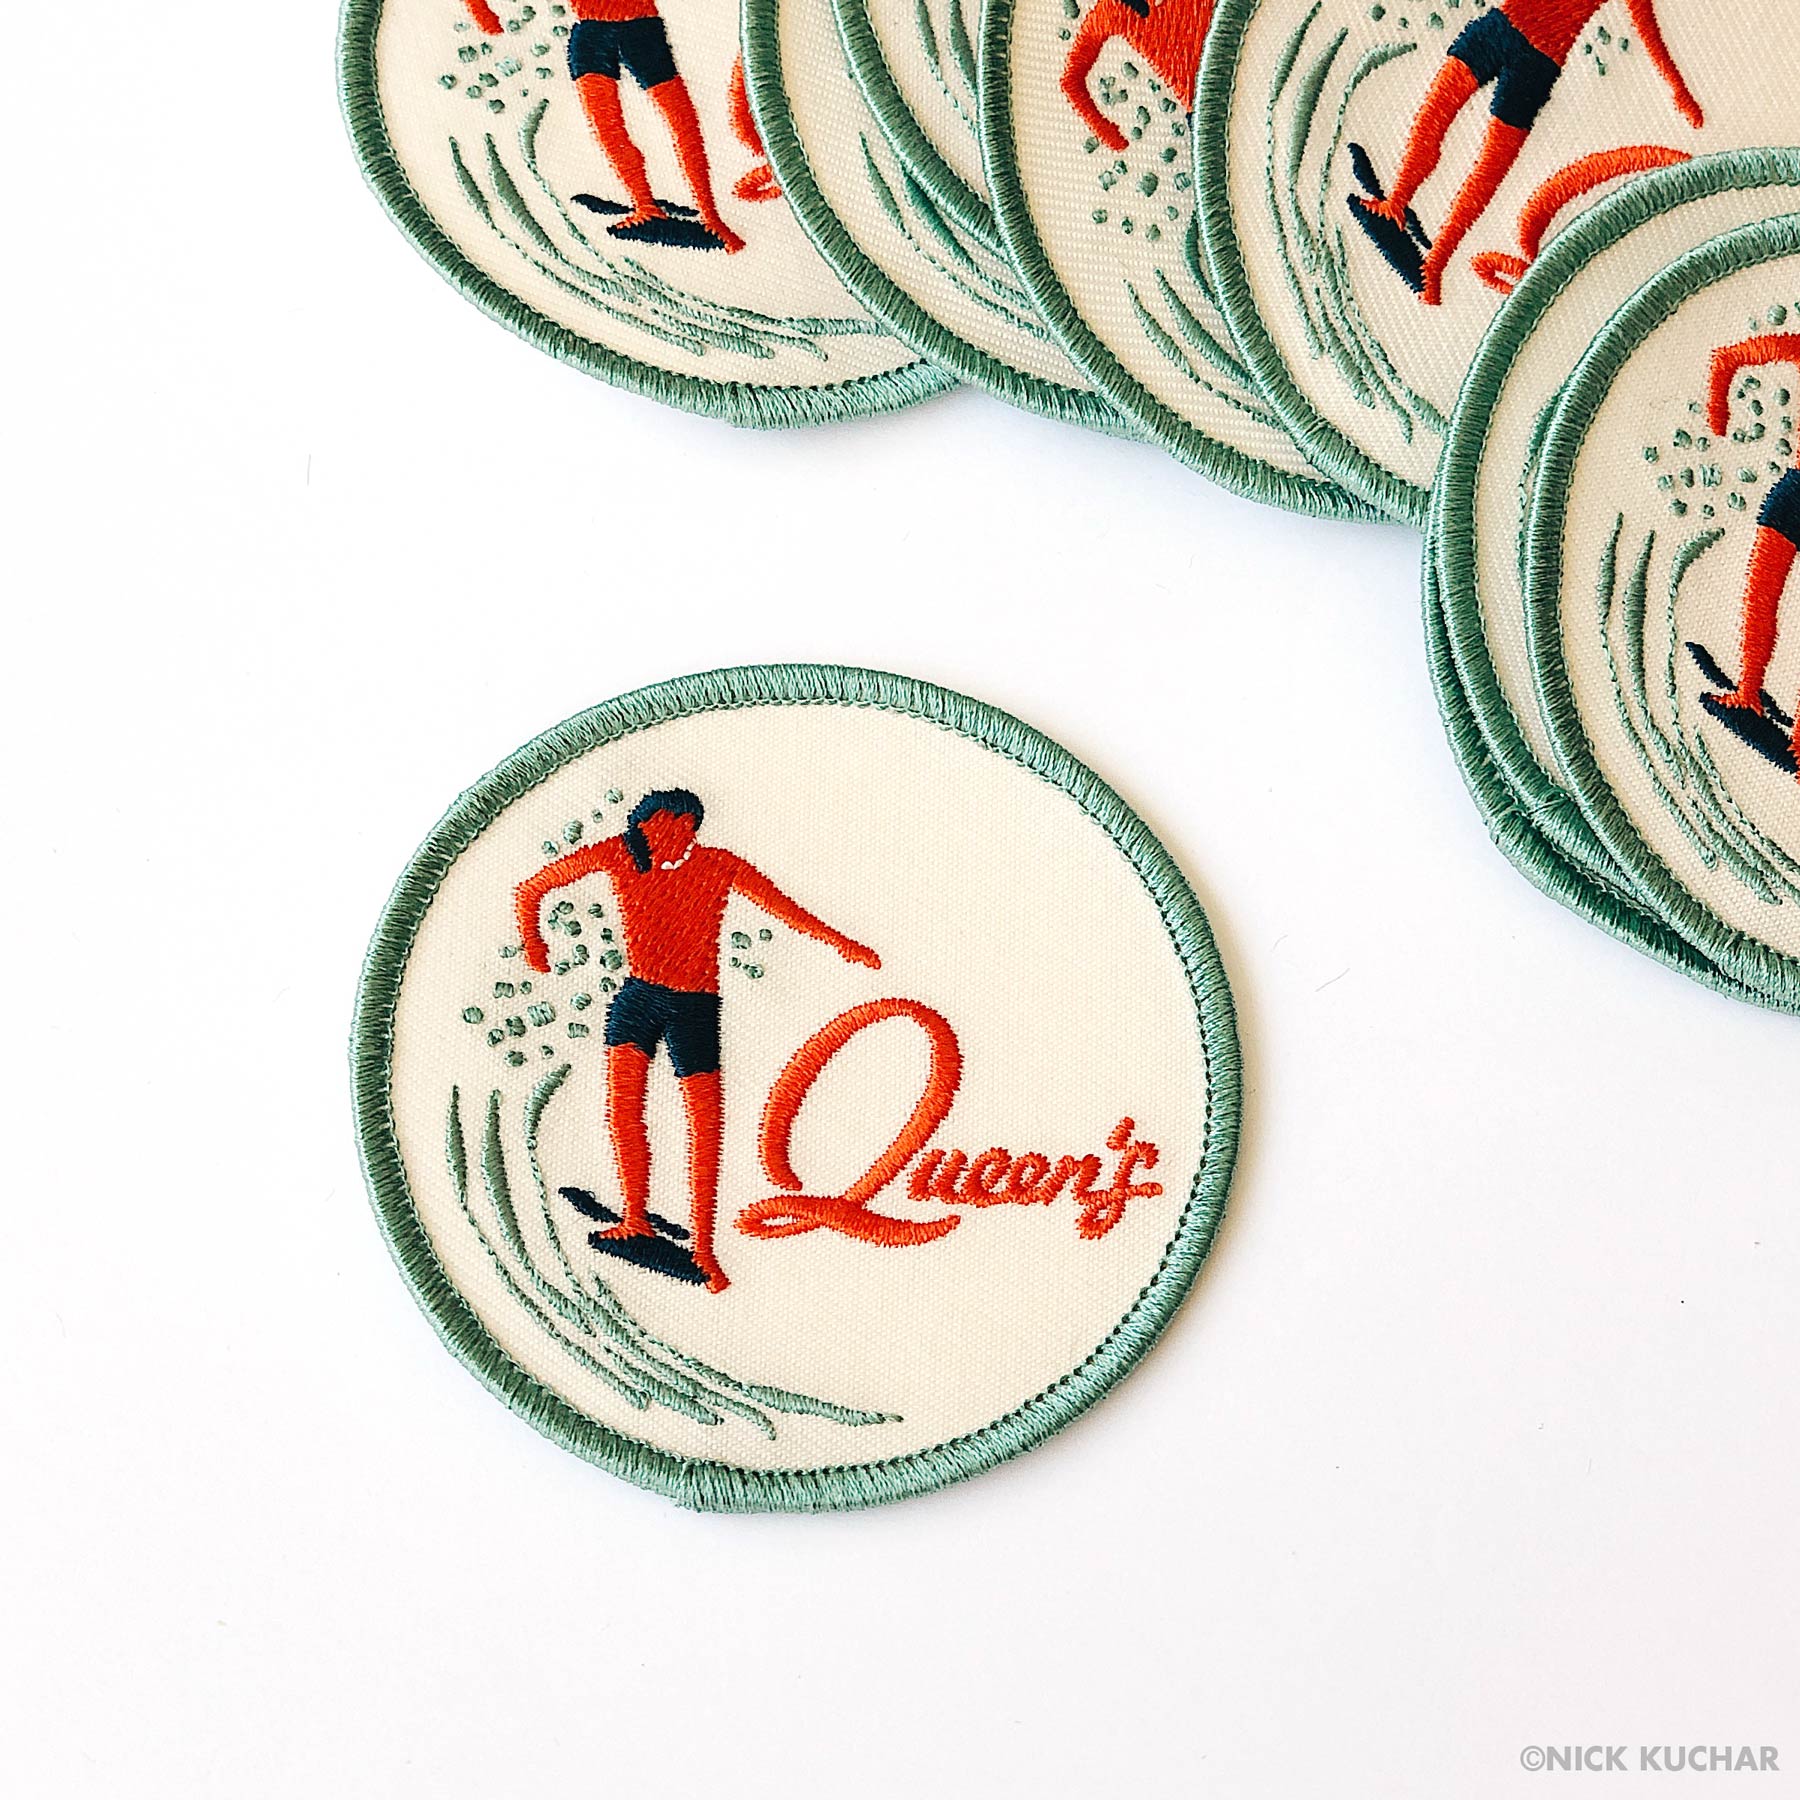 Queens surf oahu embroidered patch design by Nick Kuchar